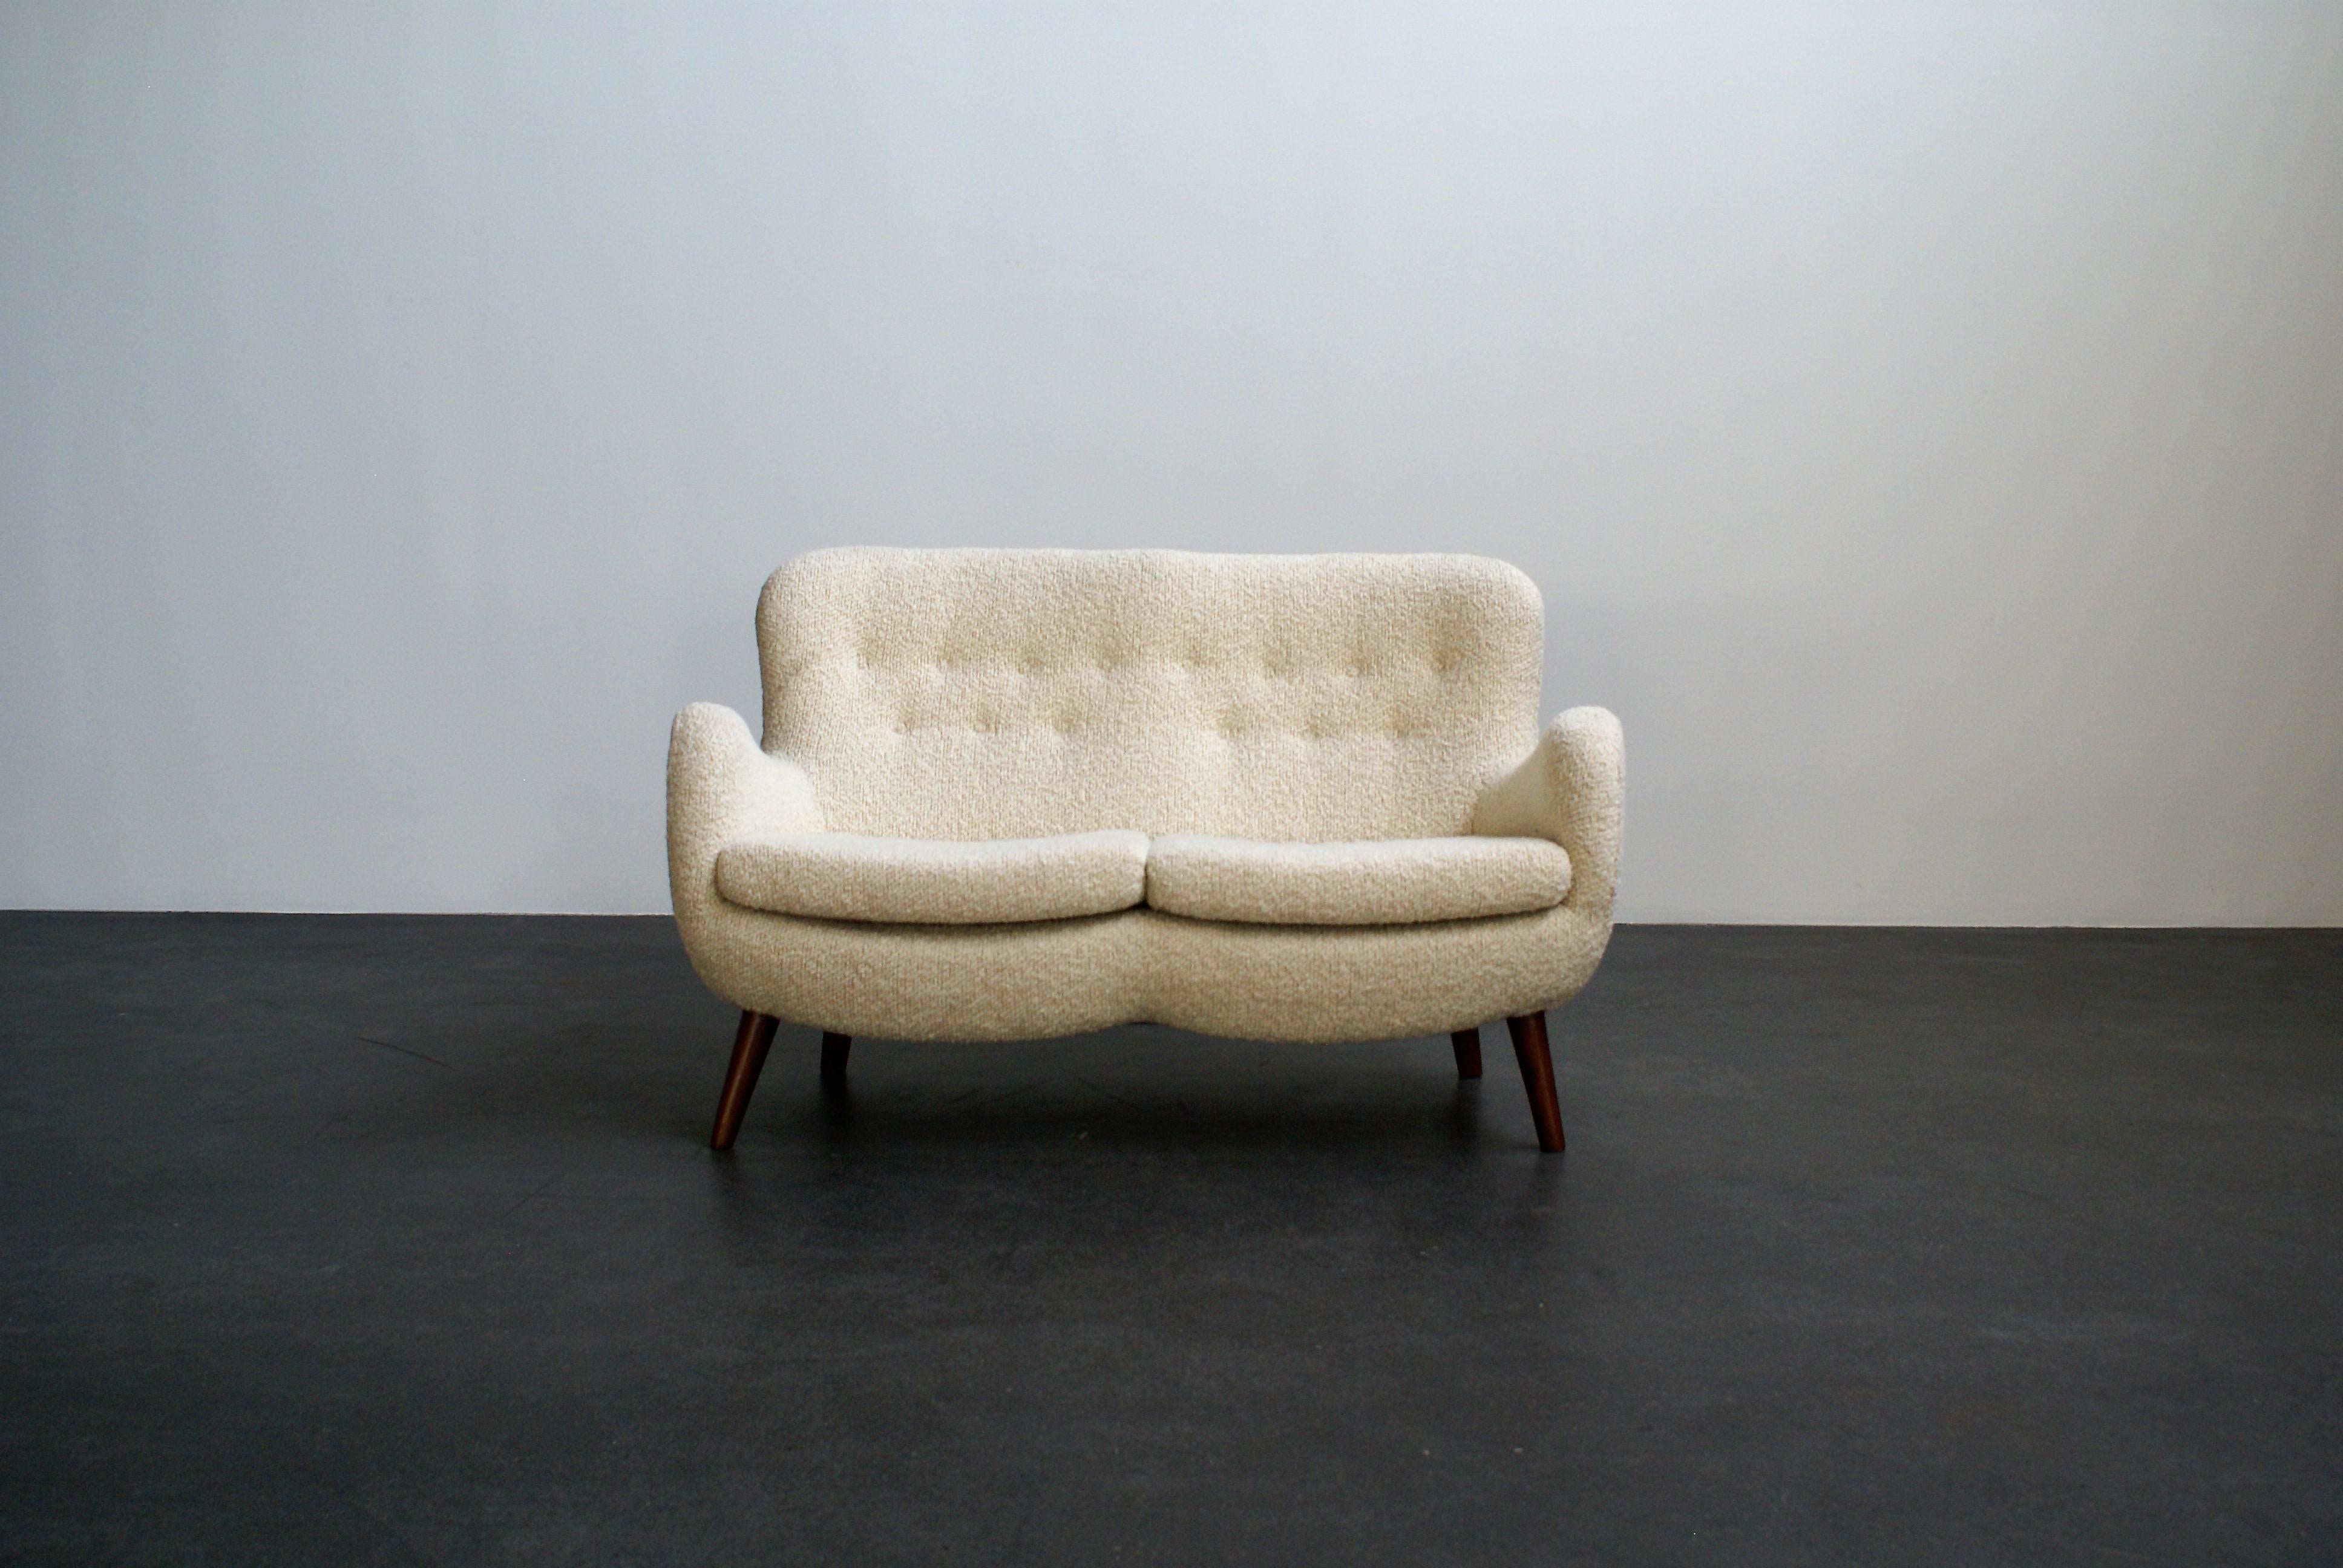 2-seater settee attributed to Frits Schlegel. Stained beech tapering legs and reupholstered in fabric. Made Denmark, 1940s.